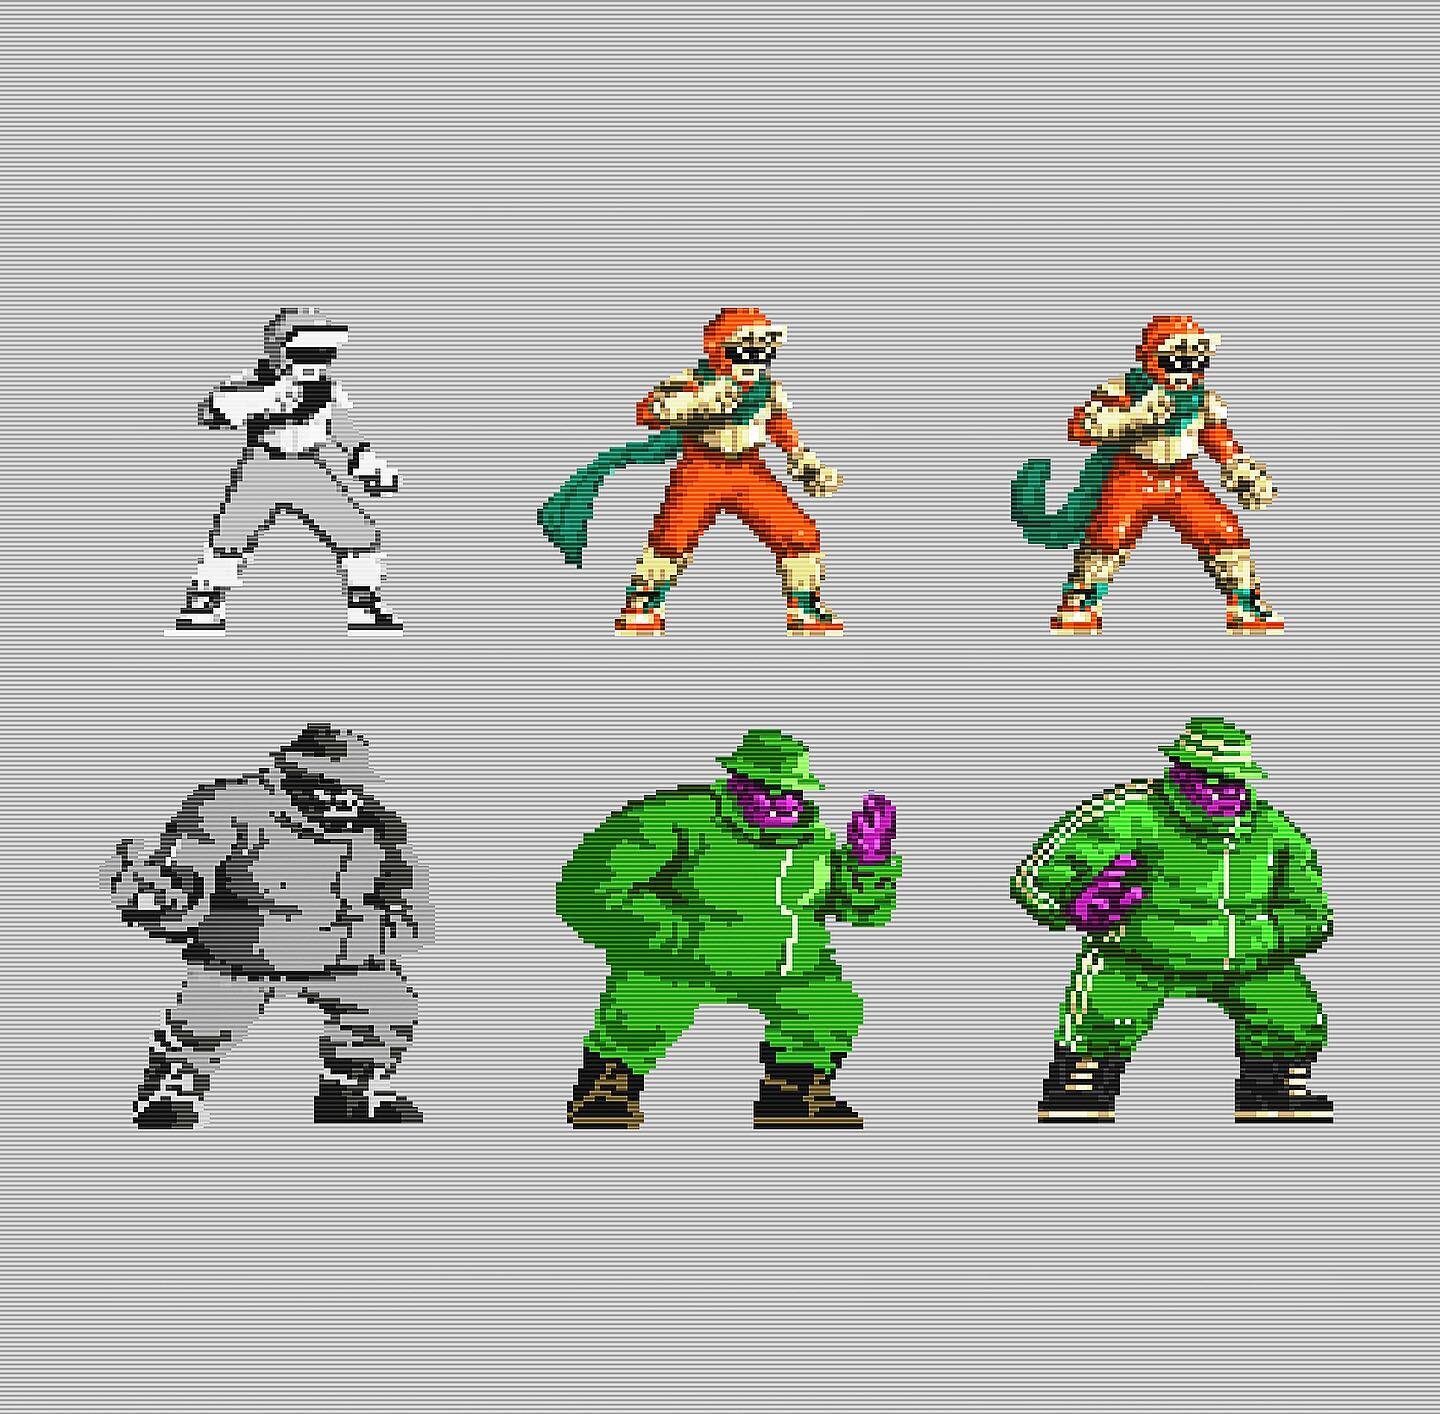 A closer look at the process of sprite making the Hero sprites! 🕹
#madnessandco #insertcoin #staymad